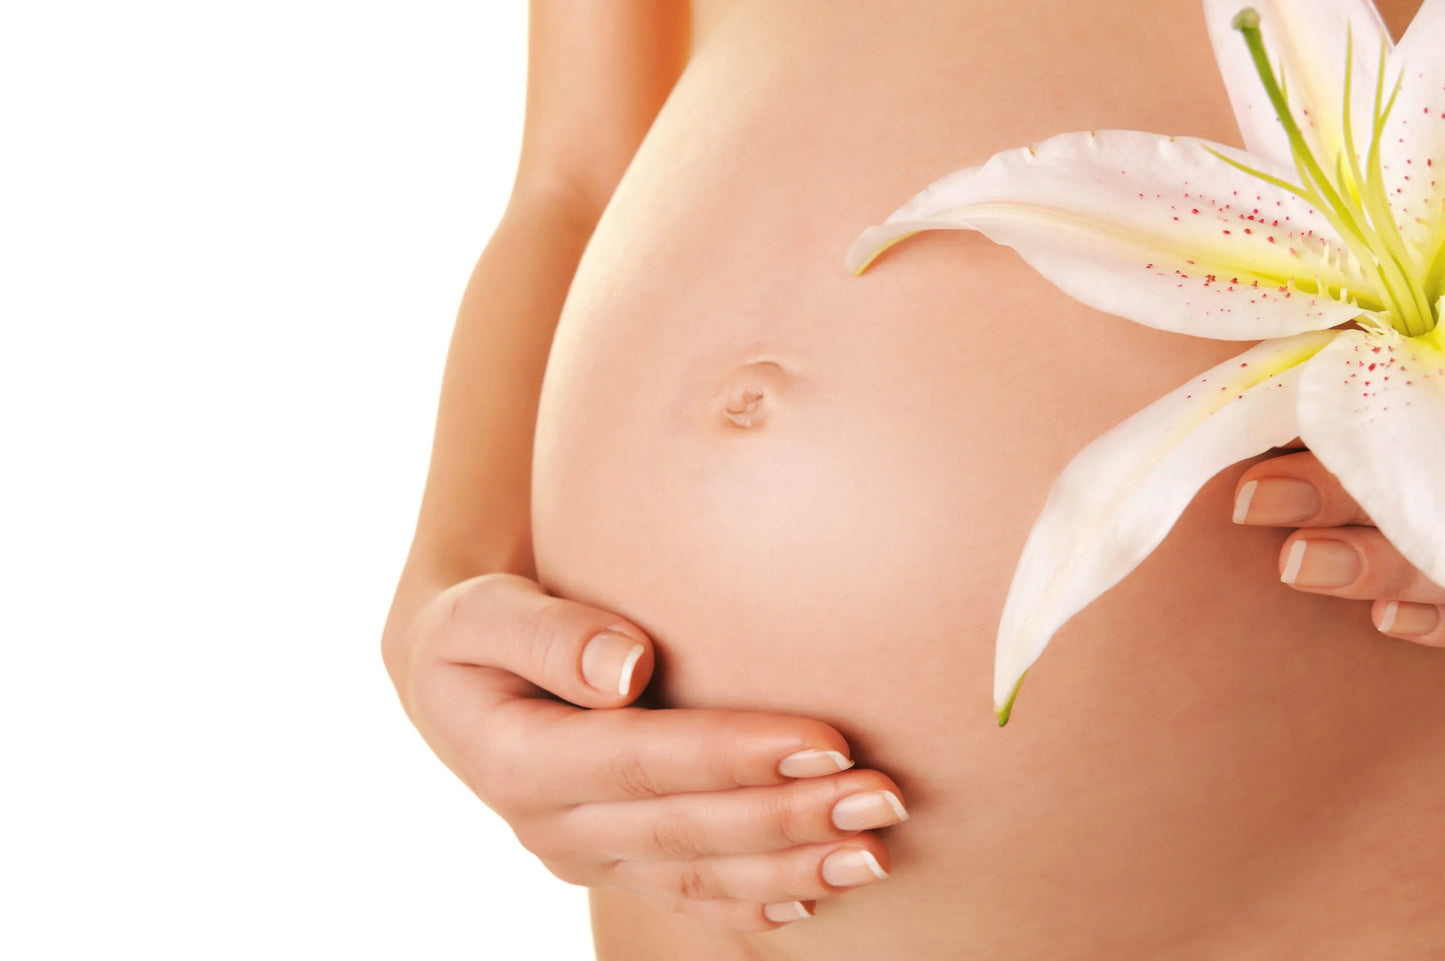 COMMON PREGNANCY PROBLEMS - TIPS TO MANAGE THEM USING OZONATED OILS